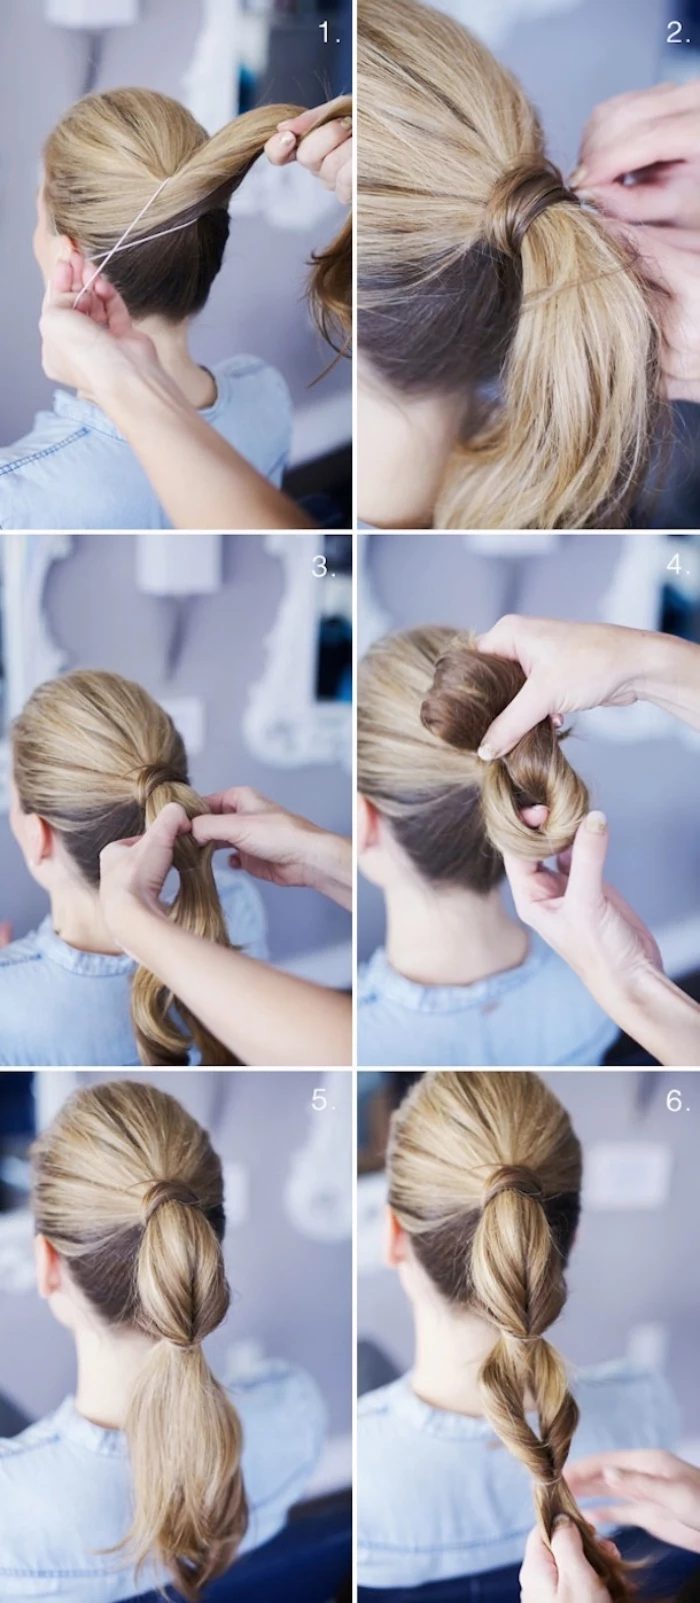 Beautiful hairstyles: 124 ideas and instructions for re-styling